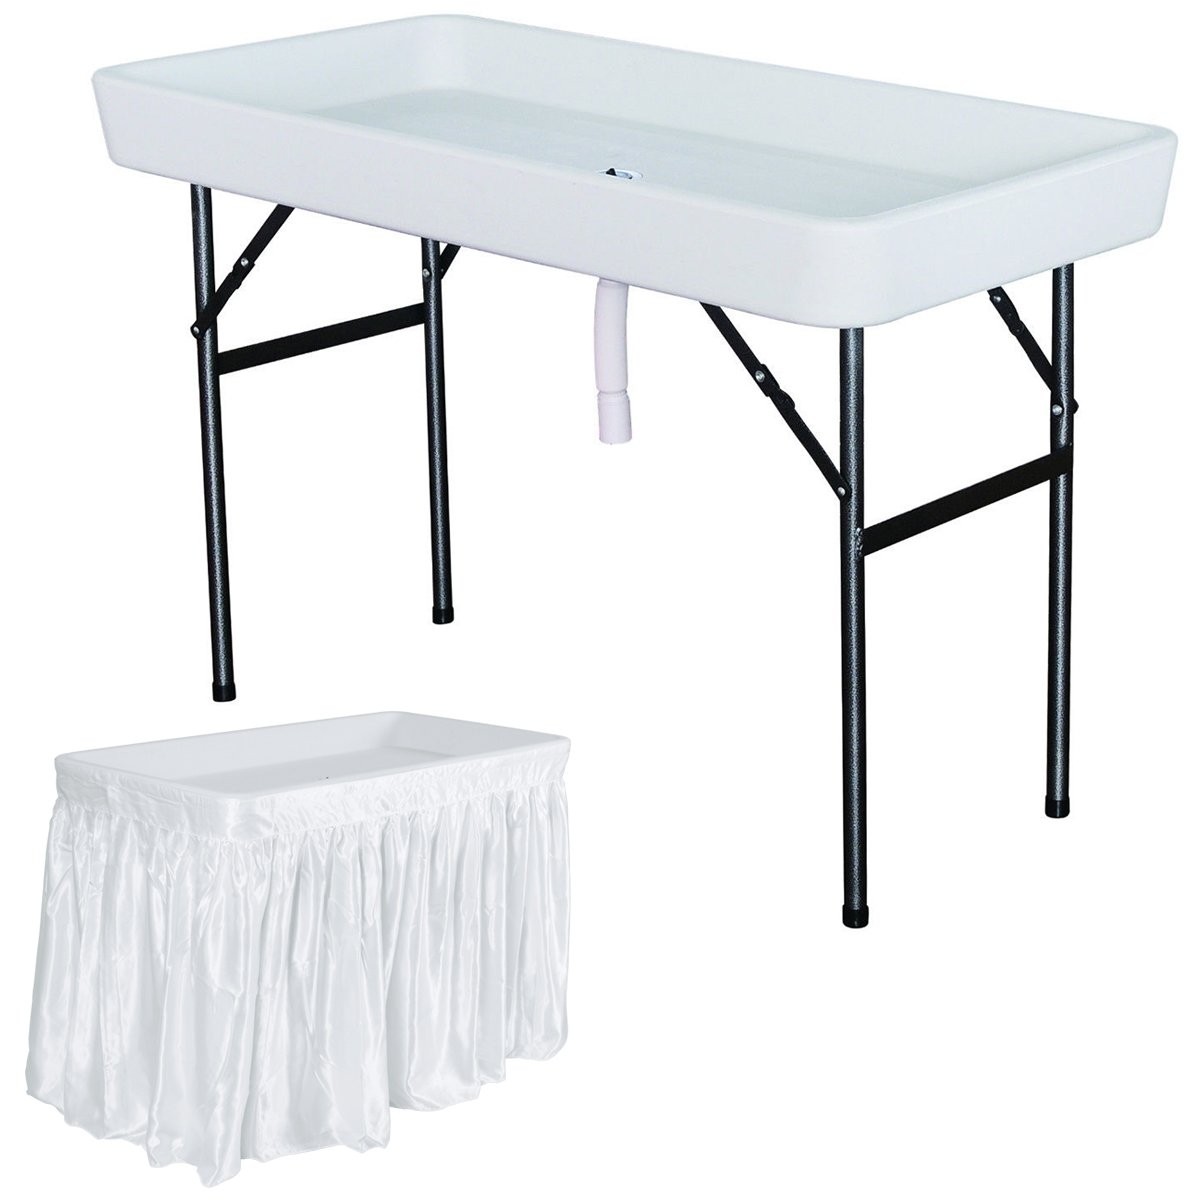 Plastic Party Ice Folding Table with Matching Skirt